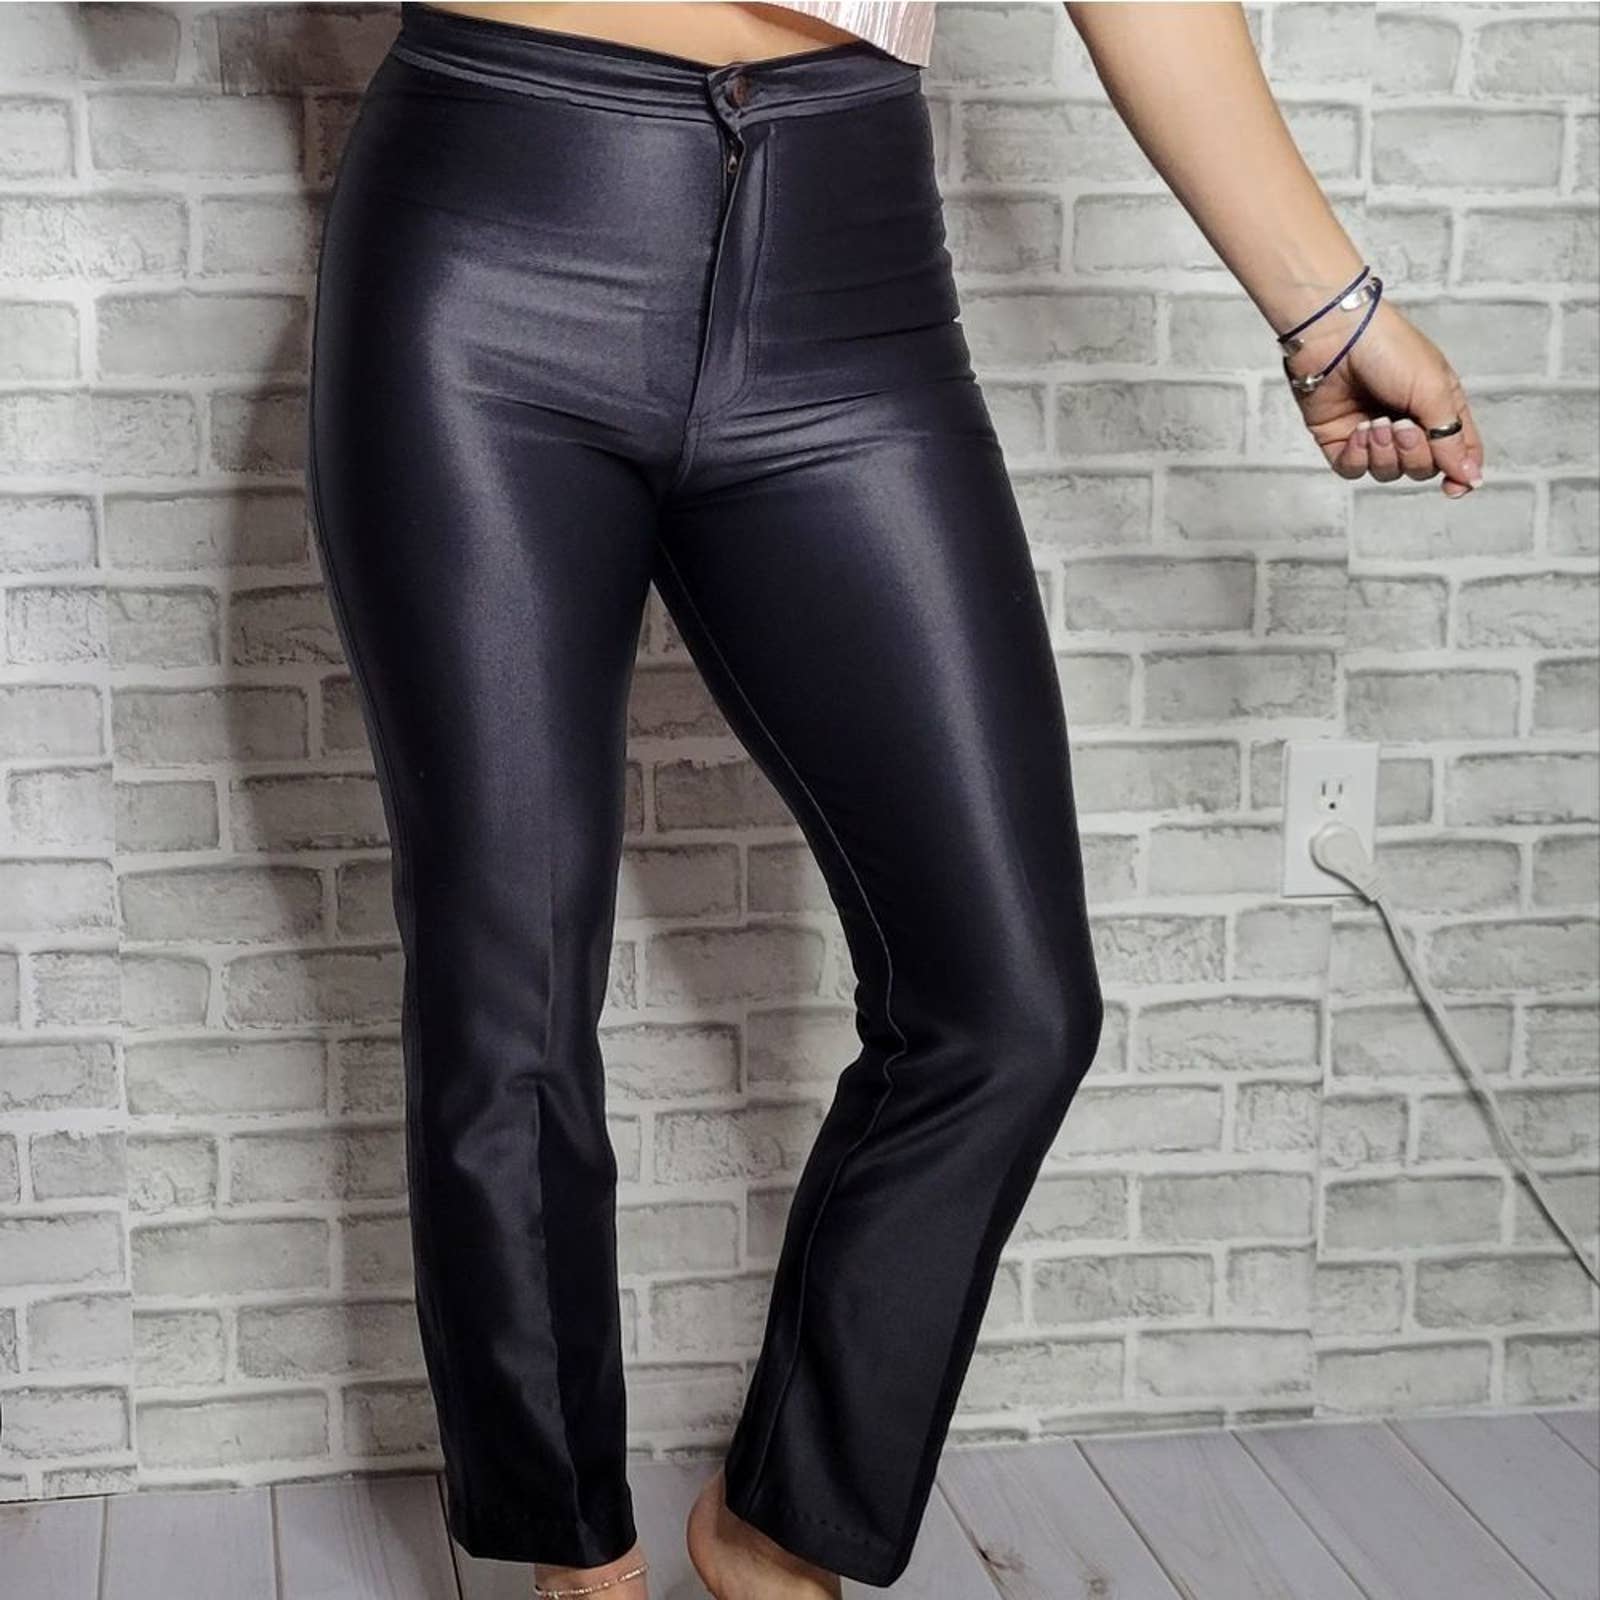 Disco pants, Disco pants outfit, Fredericks of hollywood